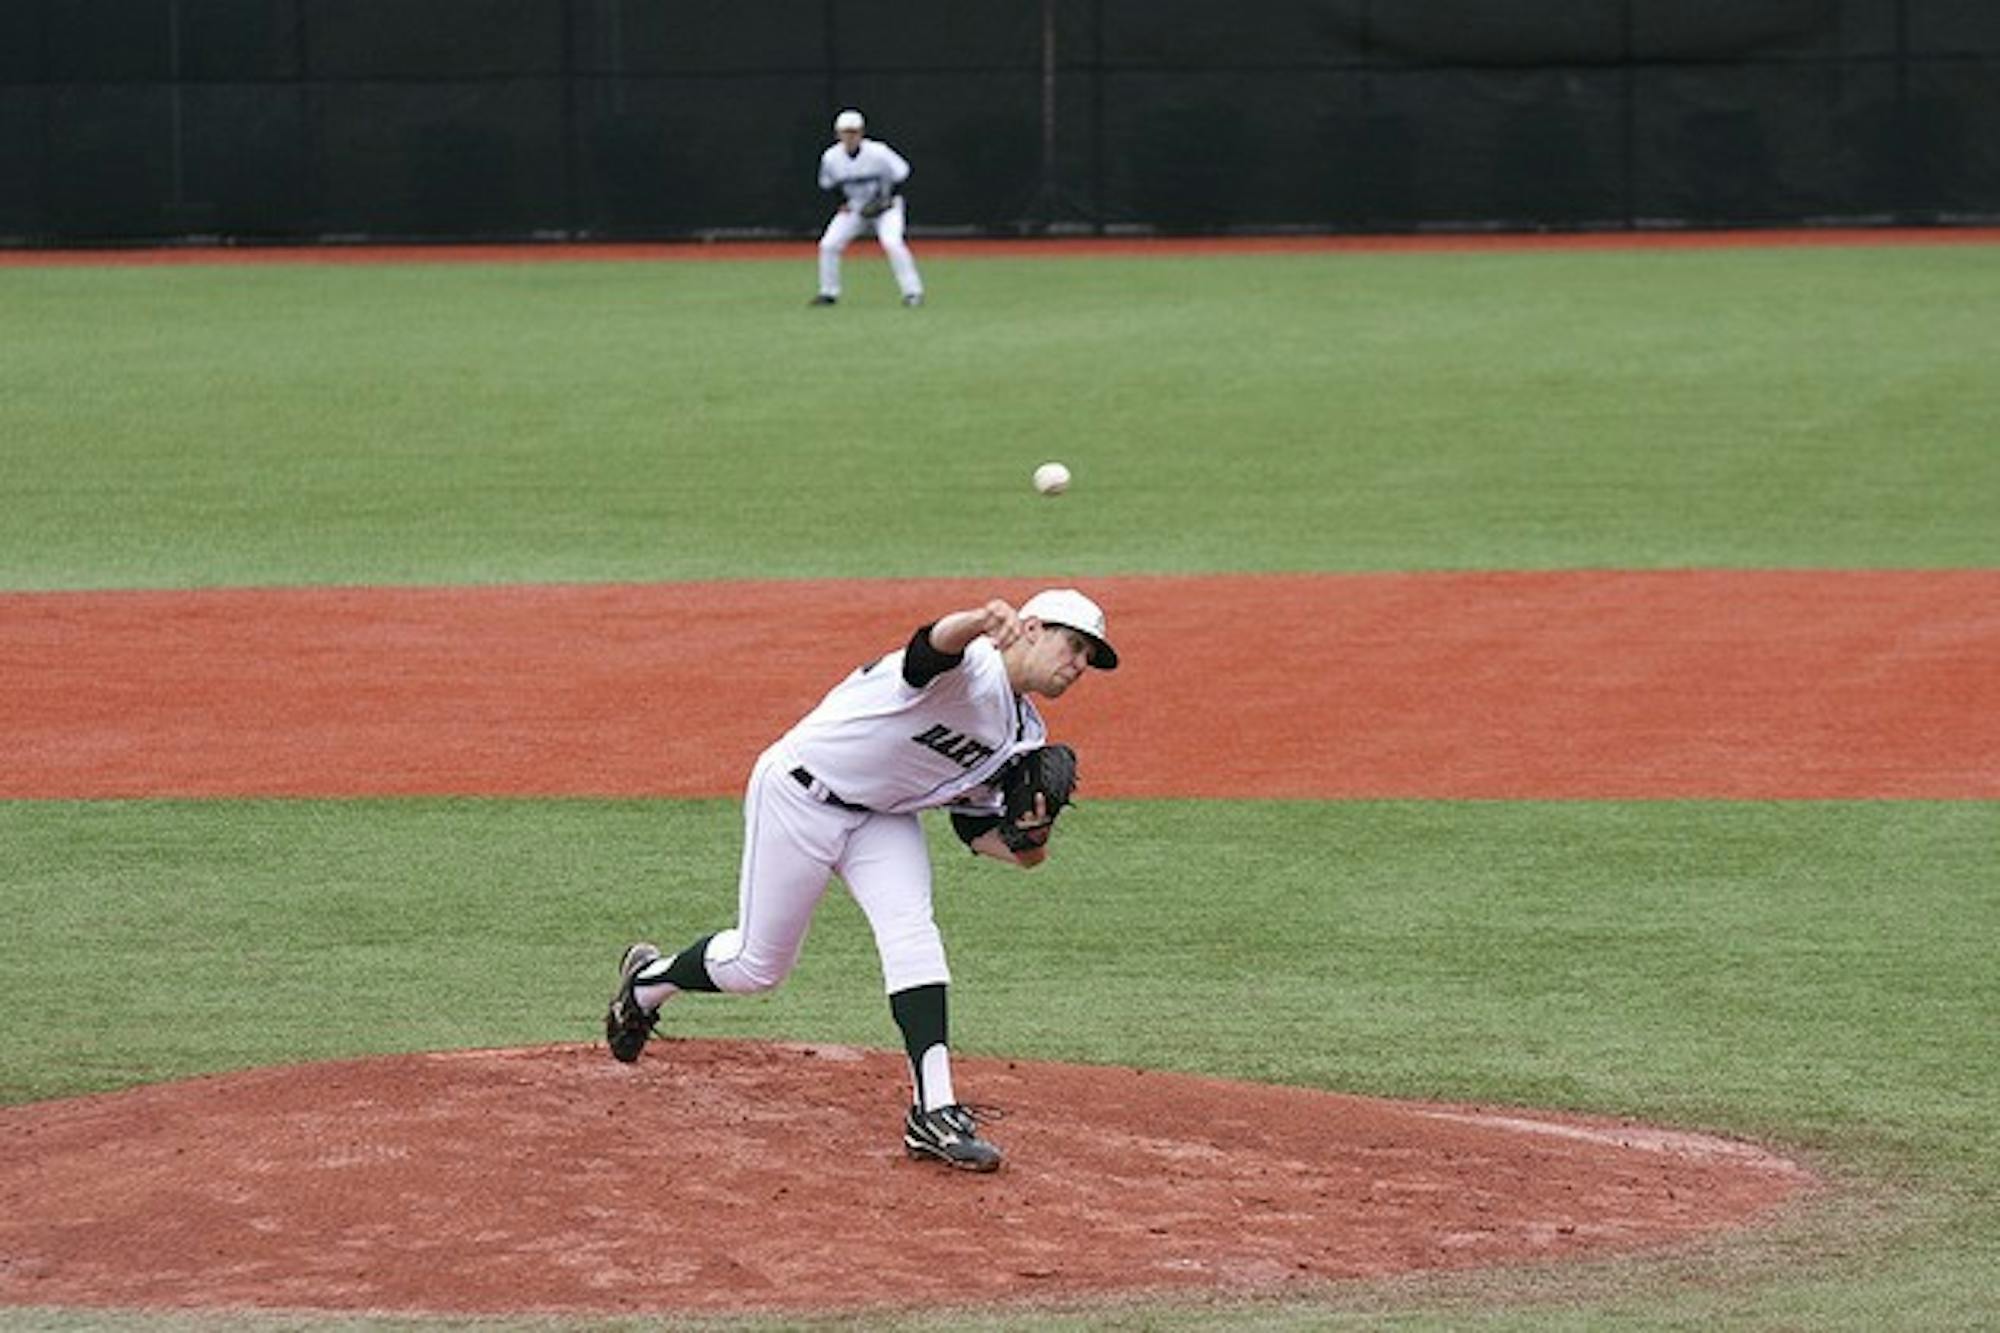 Dartmouth starter Louis Concato '14 gave up two runs in four innings of work in the Big Green's 13-6 win over the University of Hartford on Tuesday.